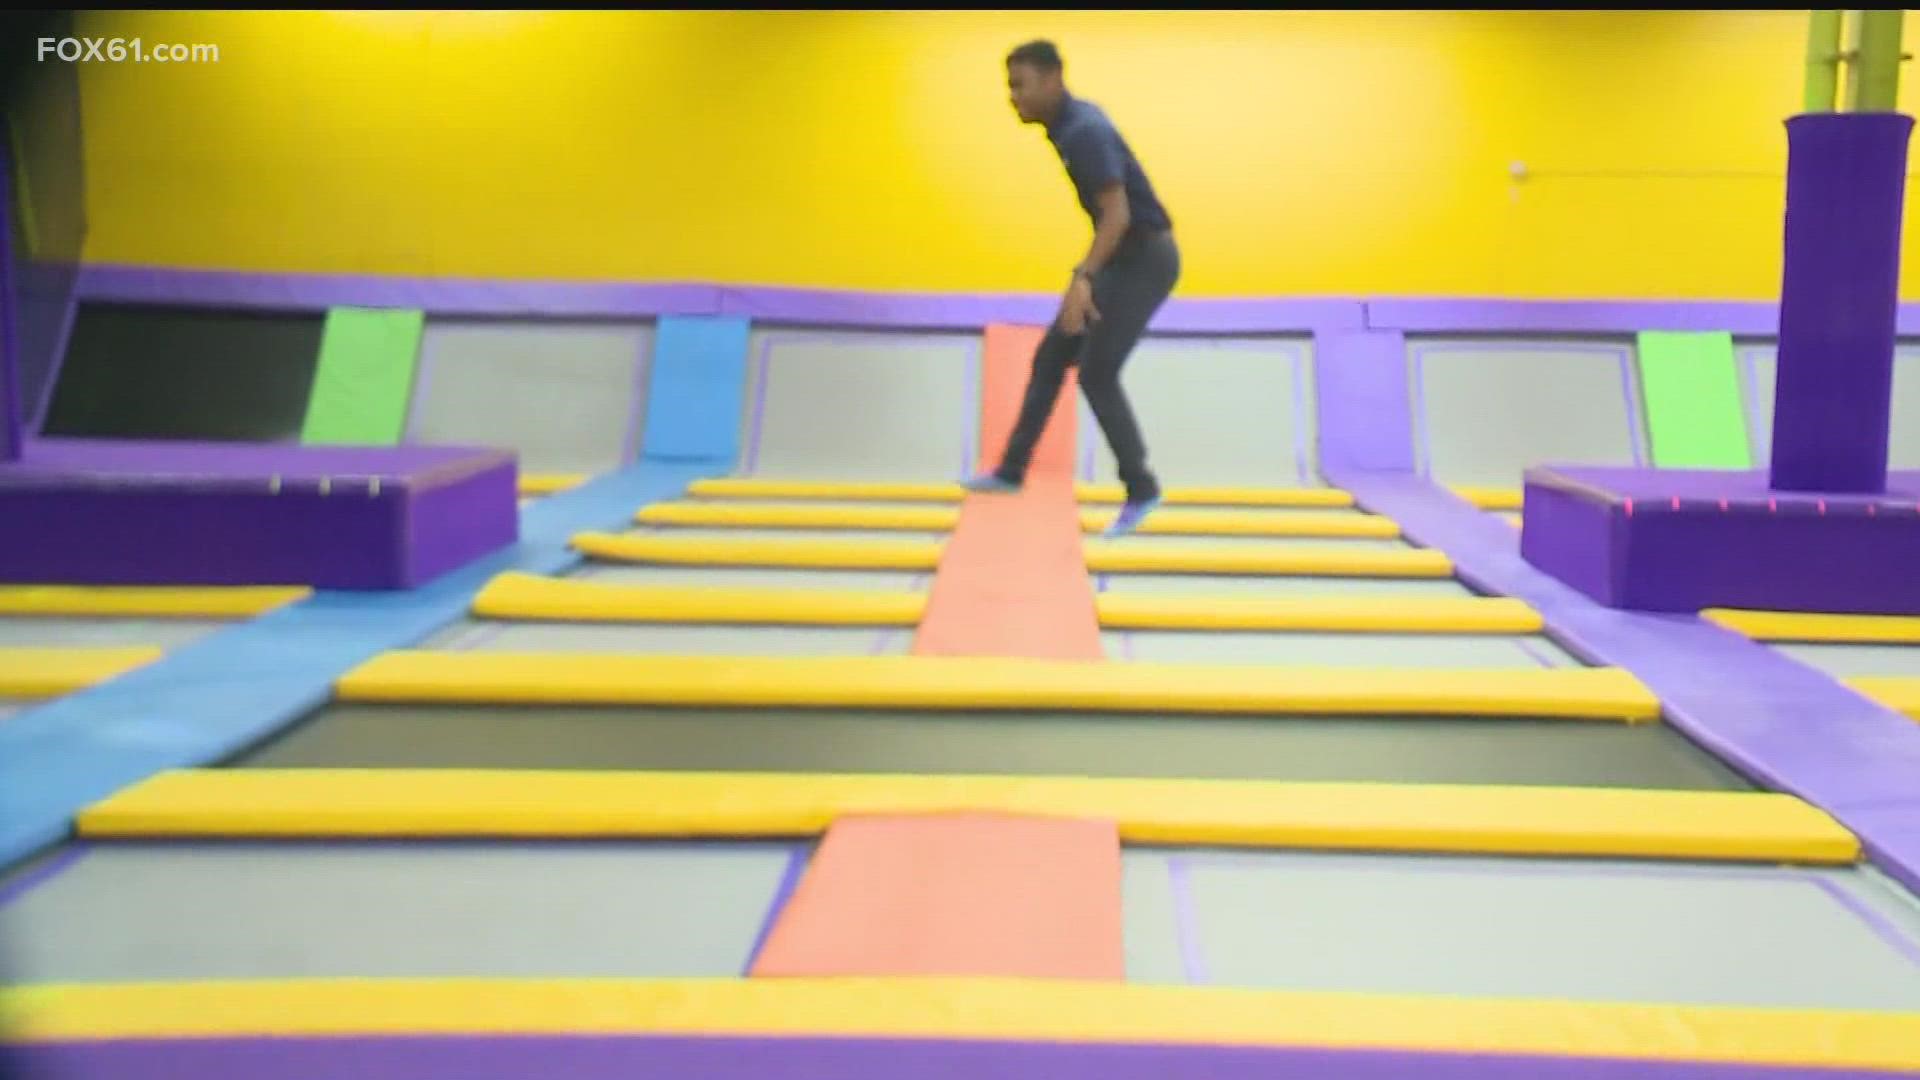 Families can bounce around in a 35,000 sq ft trampoline park. A 60-minute pass starts at $19, and a day-long pass will cost you $31.